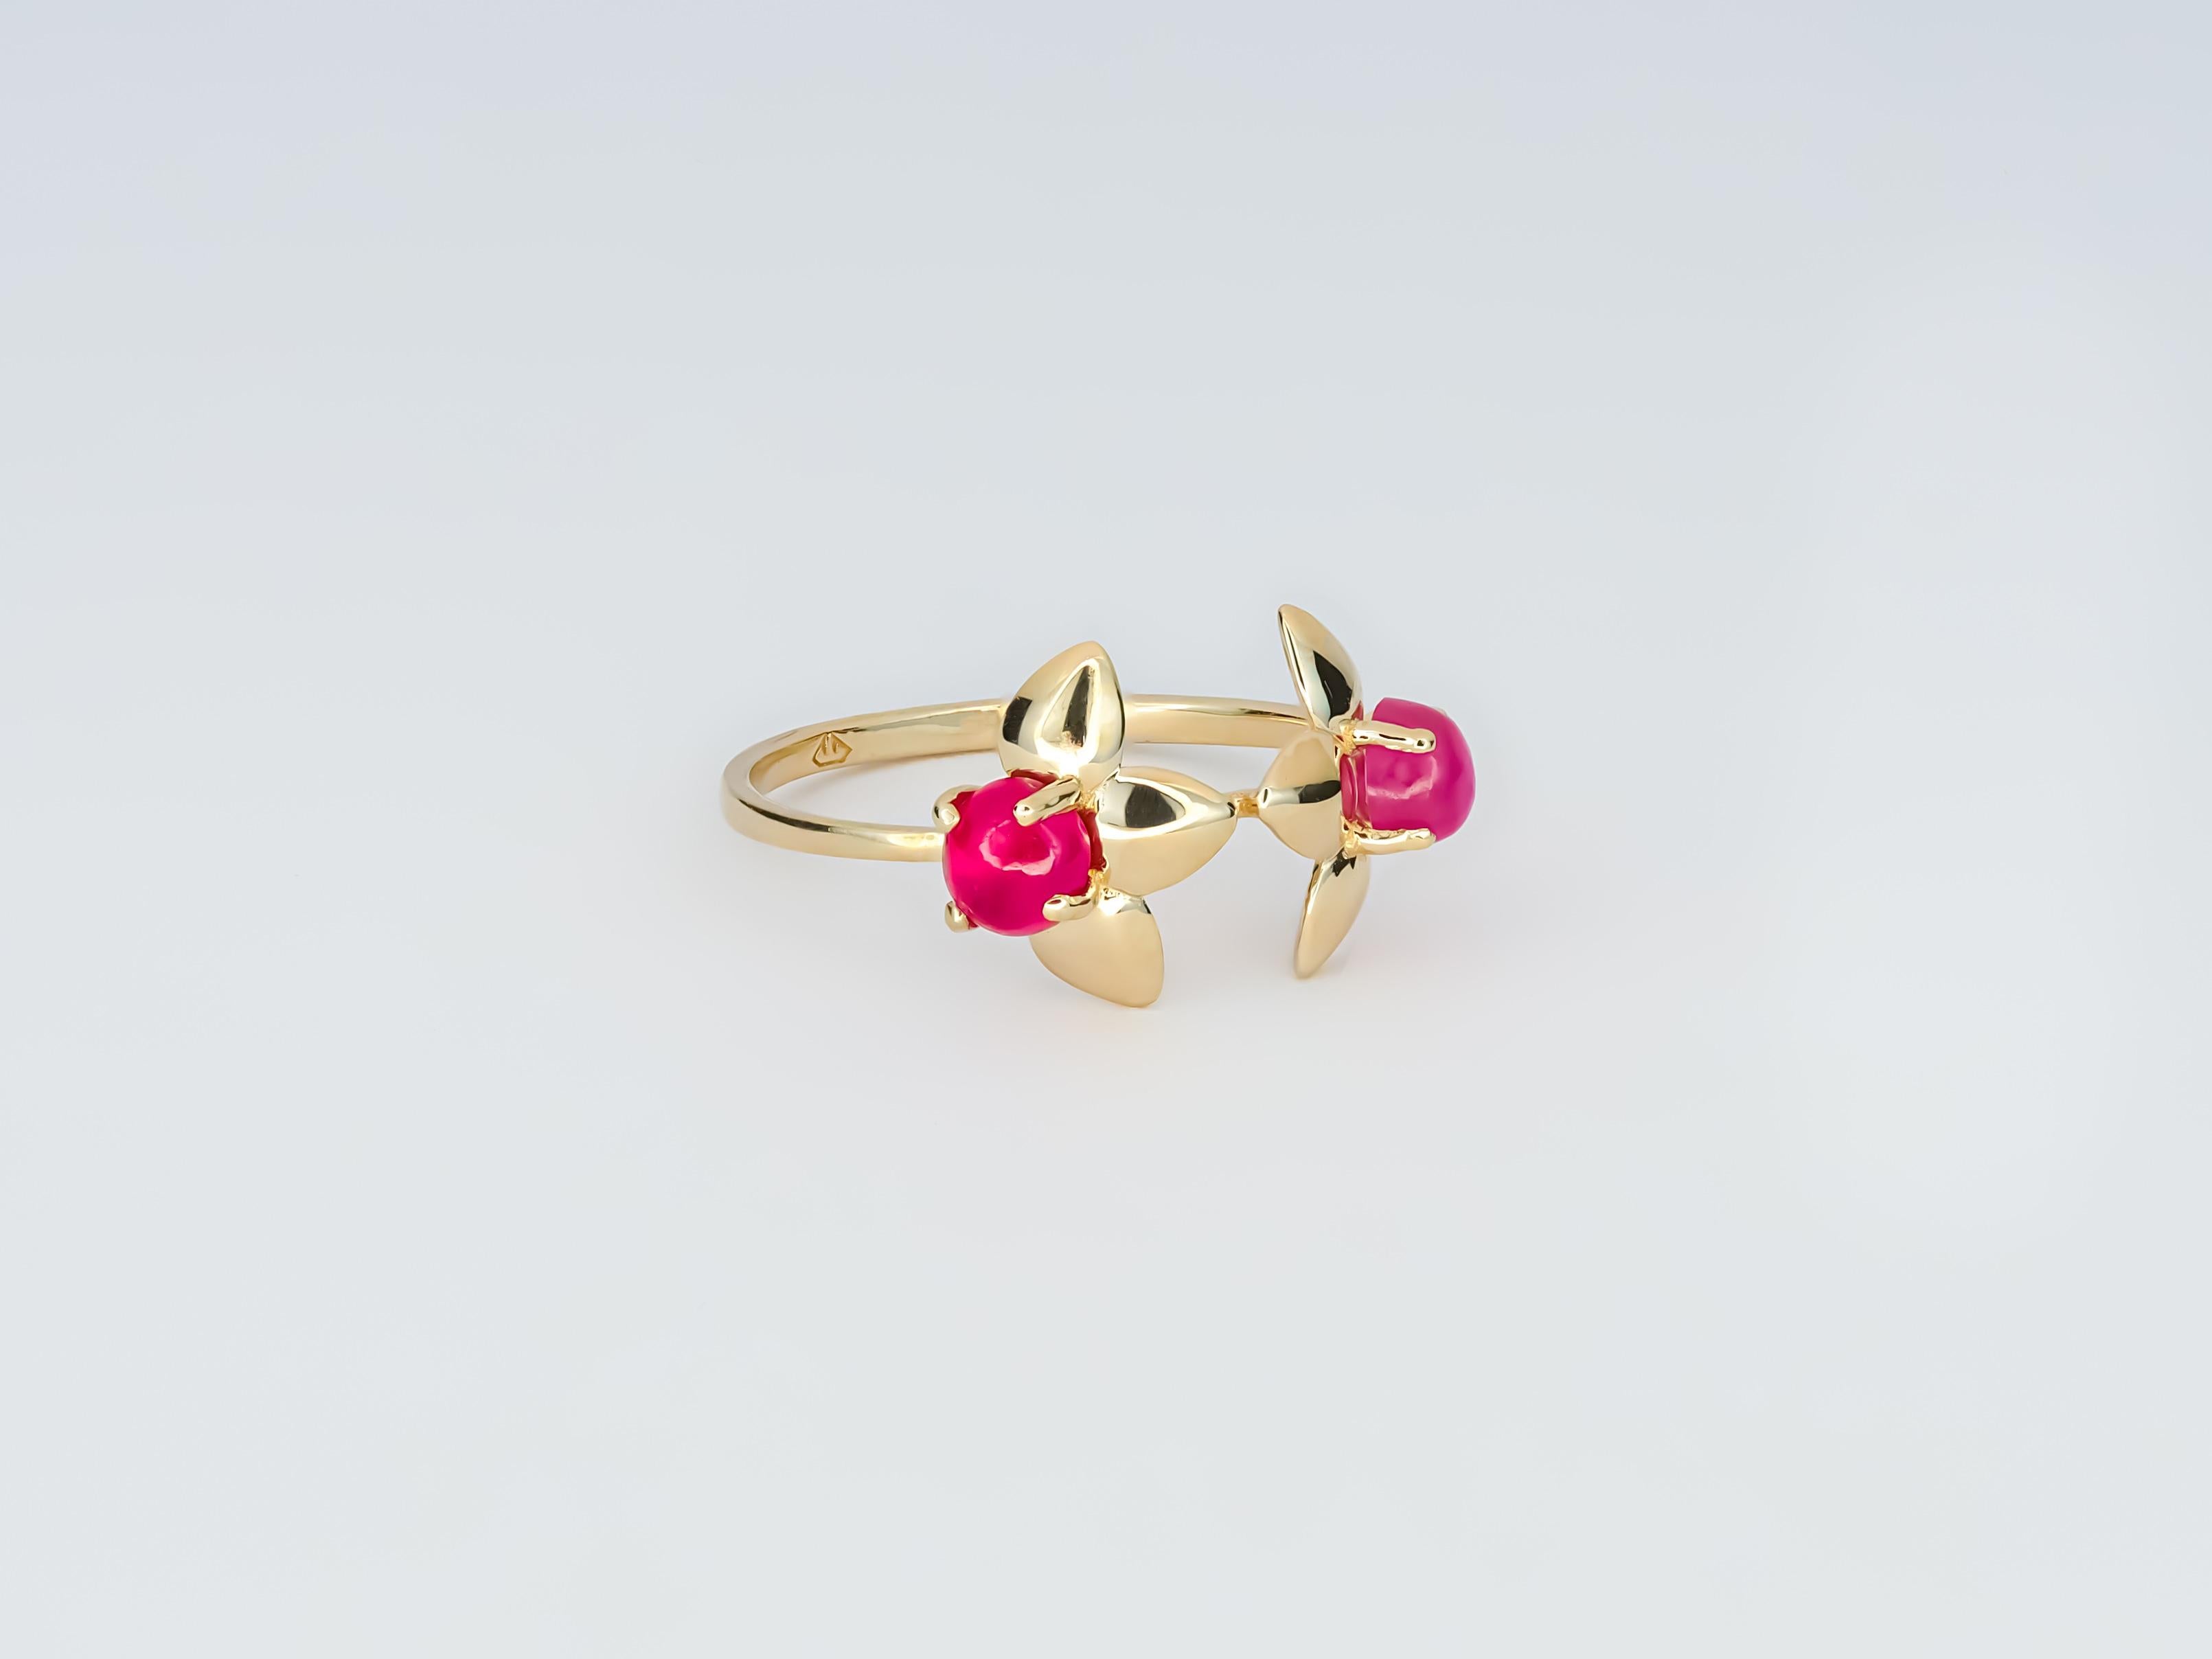 14 karat gold ring with 2 genuine rubies. Flower gold ring. July birthstone.
Weight: 1.50 g.
Size: 17 mm. (US - 7, EU - 54, UK - M 1/2)
Gemstones: 2 genuine rubies
Weight: 0.45 ct x 2 pieces, 0.90 ct total
Cabochon cut, color - red and rose
Clarity: